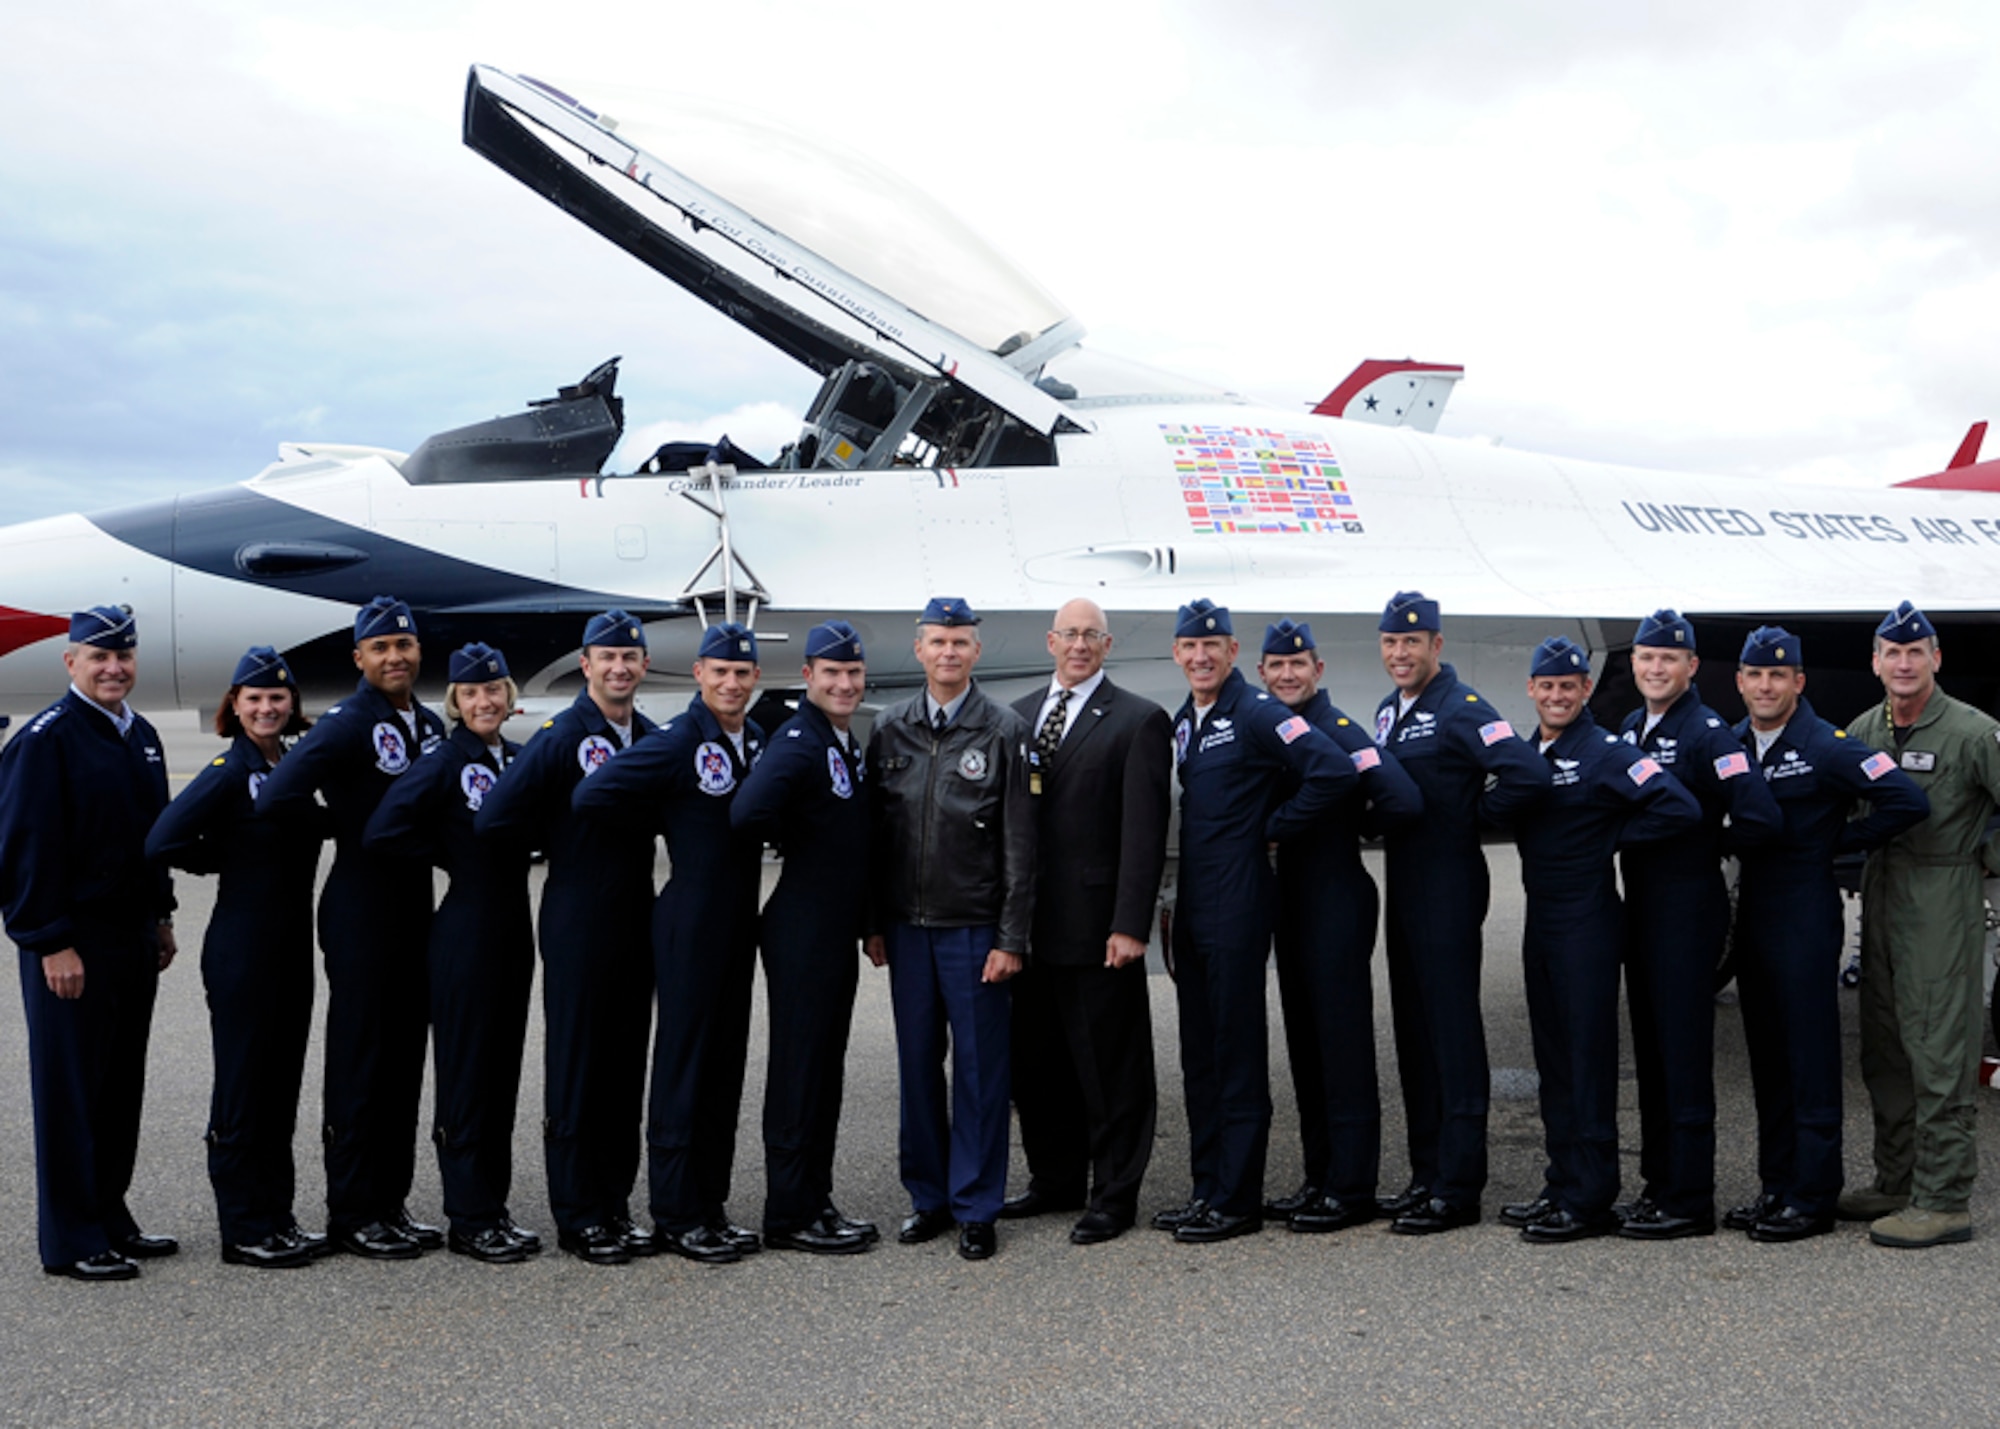 The U.S. Air Force Thunderbirds pose for a photograph with the U.S. Ambassador to Finland, Bruce J. Oreck, at Turku Air Base, Finland, June 18, 2011. The Thunderbird visit marks the first time in the team's 58-year history to fly in Finland. (U.S. Air Force photo by Staff Sgt. Richard Rose Jr./Released)